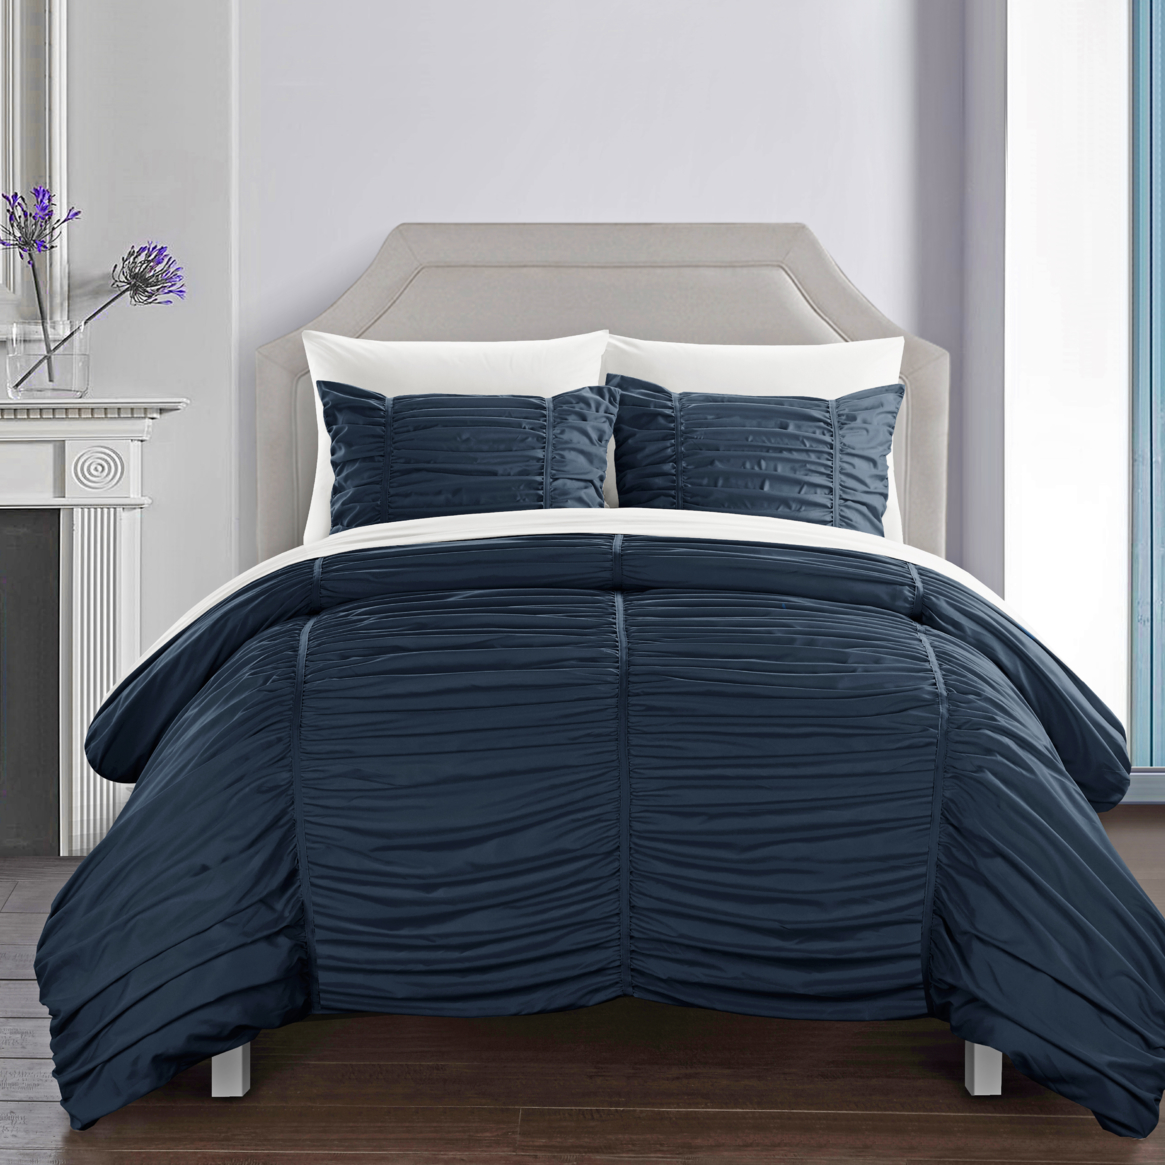 Kleia 7 Or 5 Piece Comforter Set Contemporary Striped Ruched Ruffled Design Bed In A Bag - Navy, Twin X-long